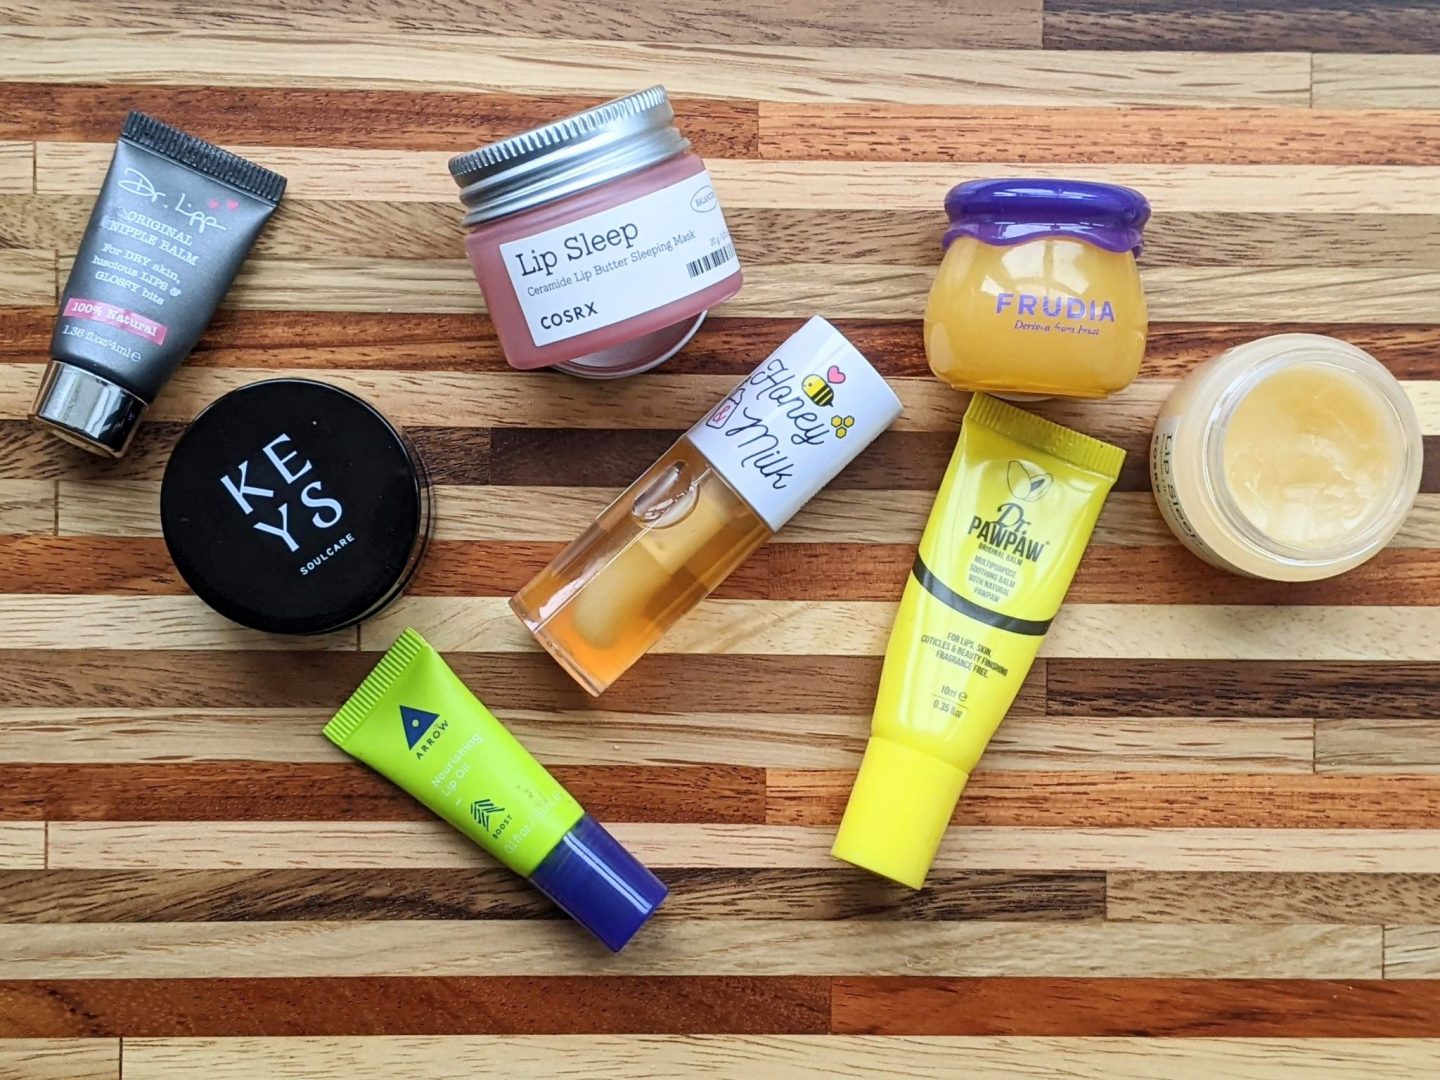 My Favourite Lip Care Products for Chapped Lips